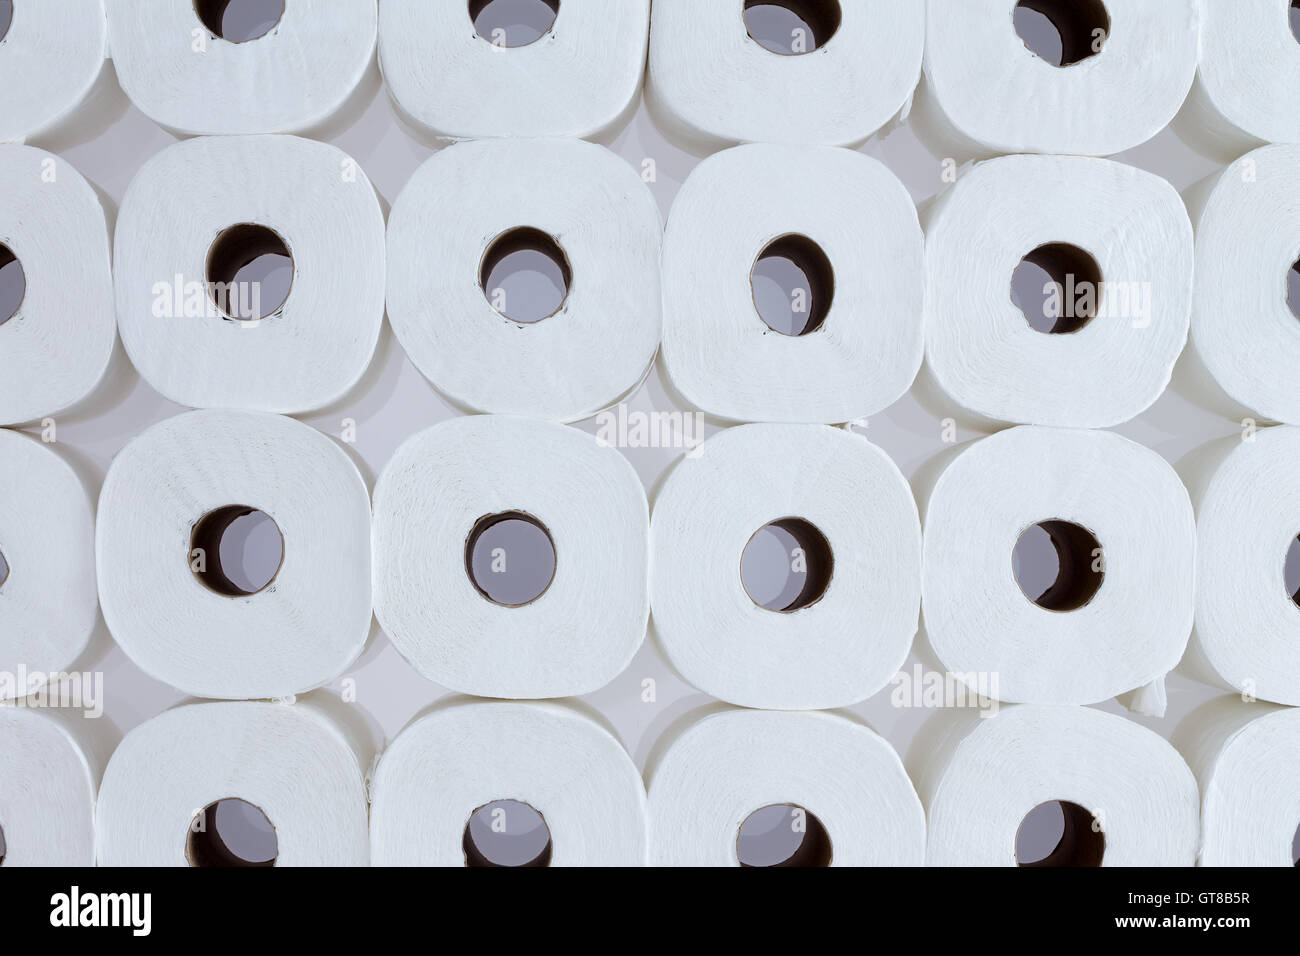 Full frame background pattern of white toilet paper rolls arranged in neat rows viewed from above - Toilet paper for everyone Stock Photo